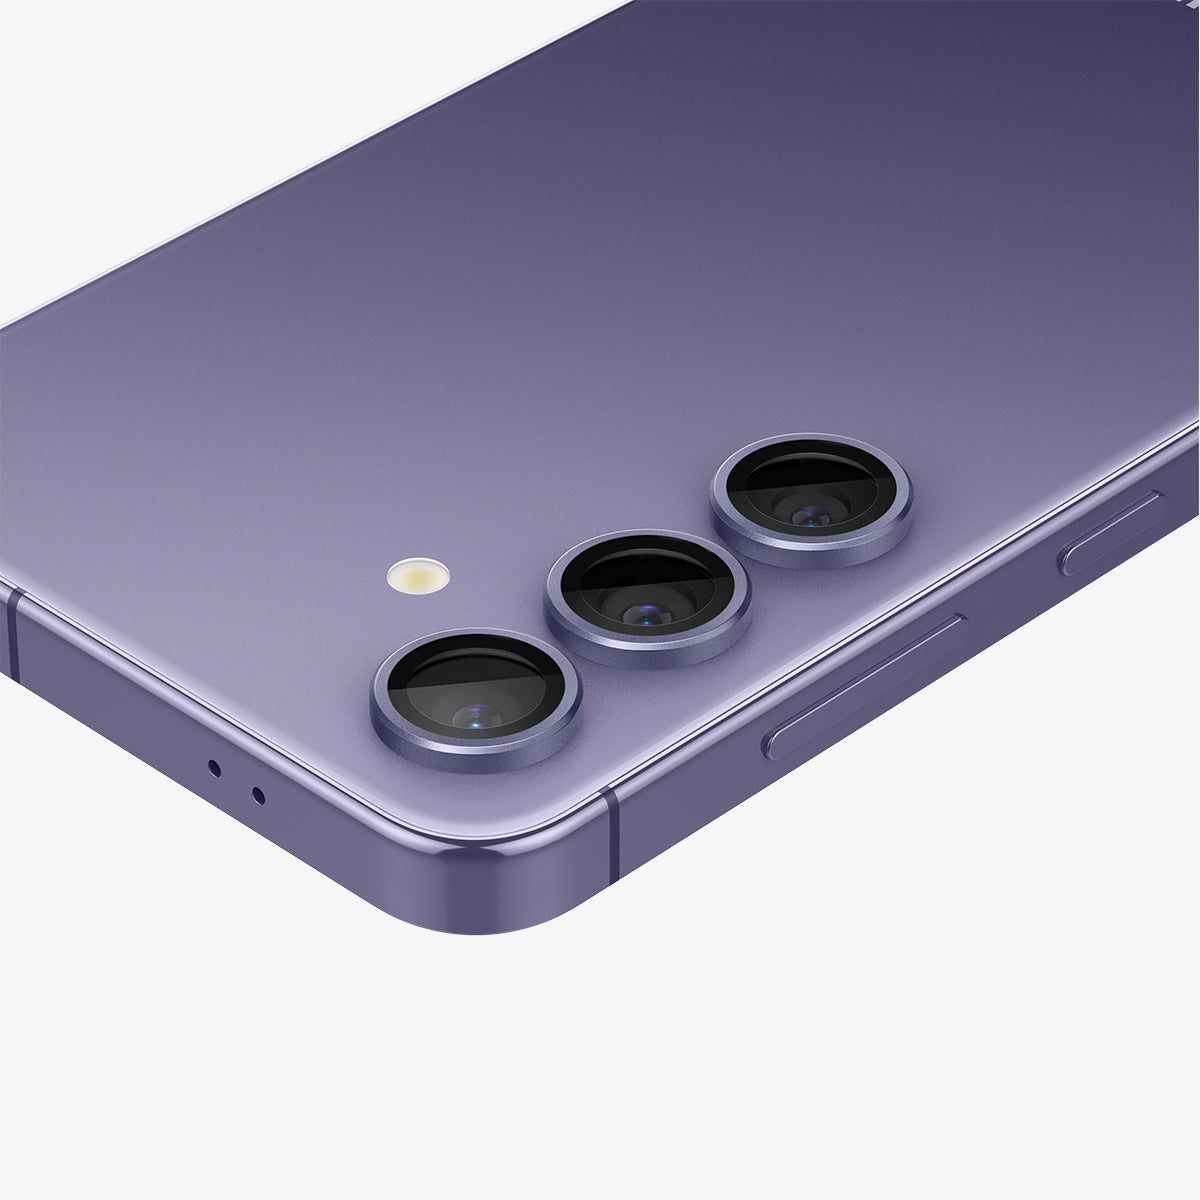 AGL07435 - Galaxy S24 Plus Optik Pro EZ Fit Lens Protector in Violet showing the lens protector installed on the device zoomed in on a flat surface